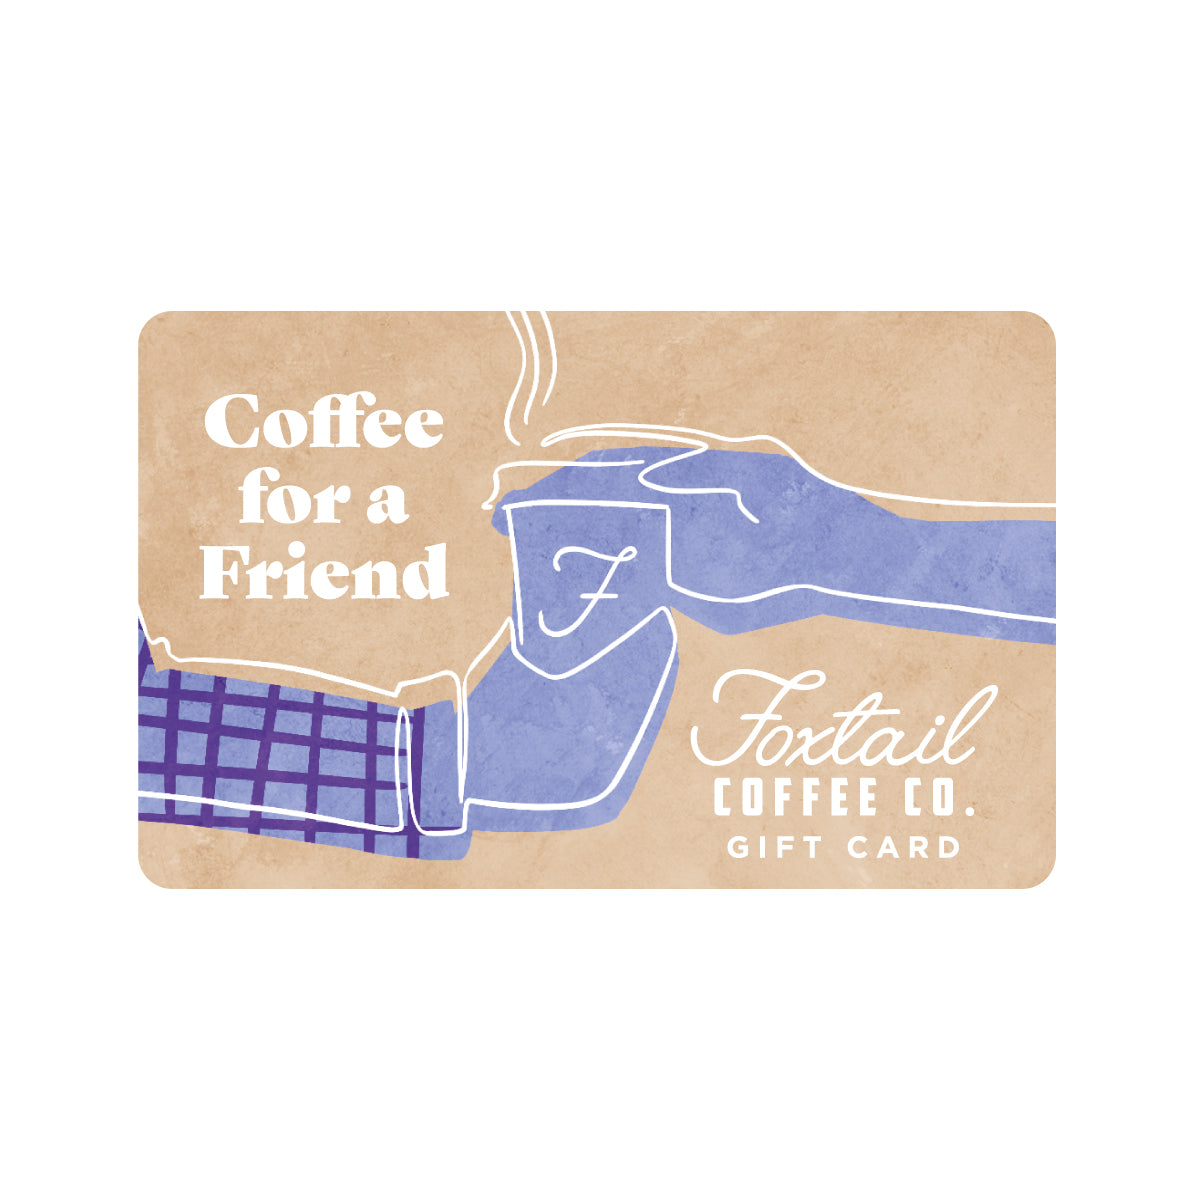 Foxtail Coffee Gift Card - Coffee For A Friend